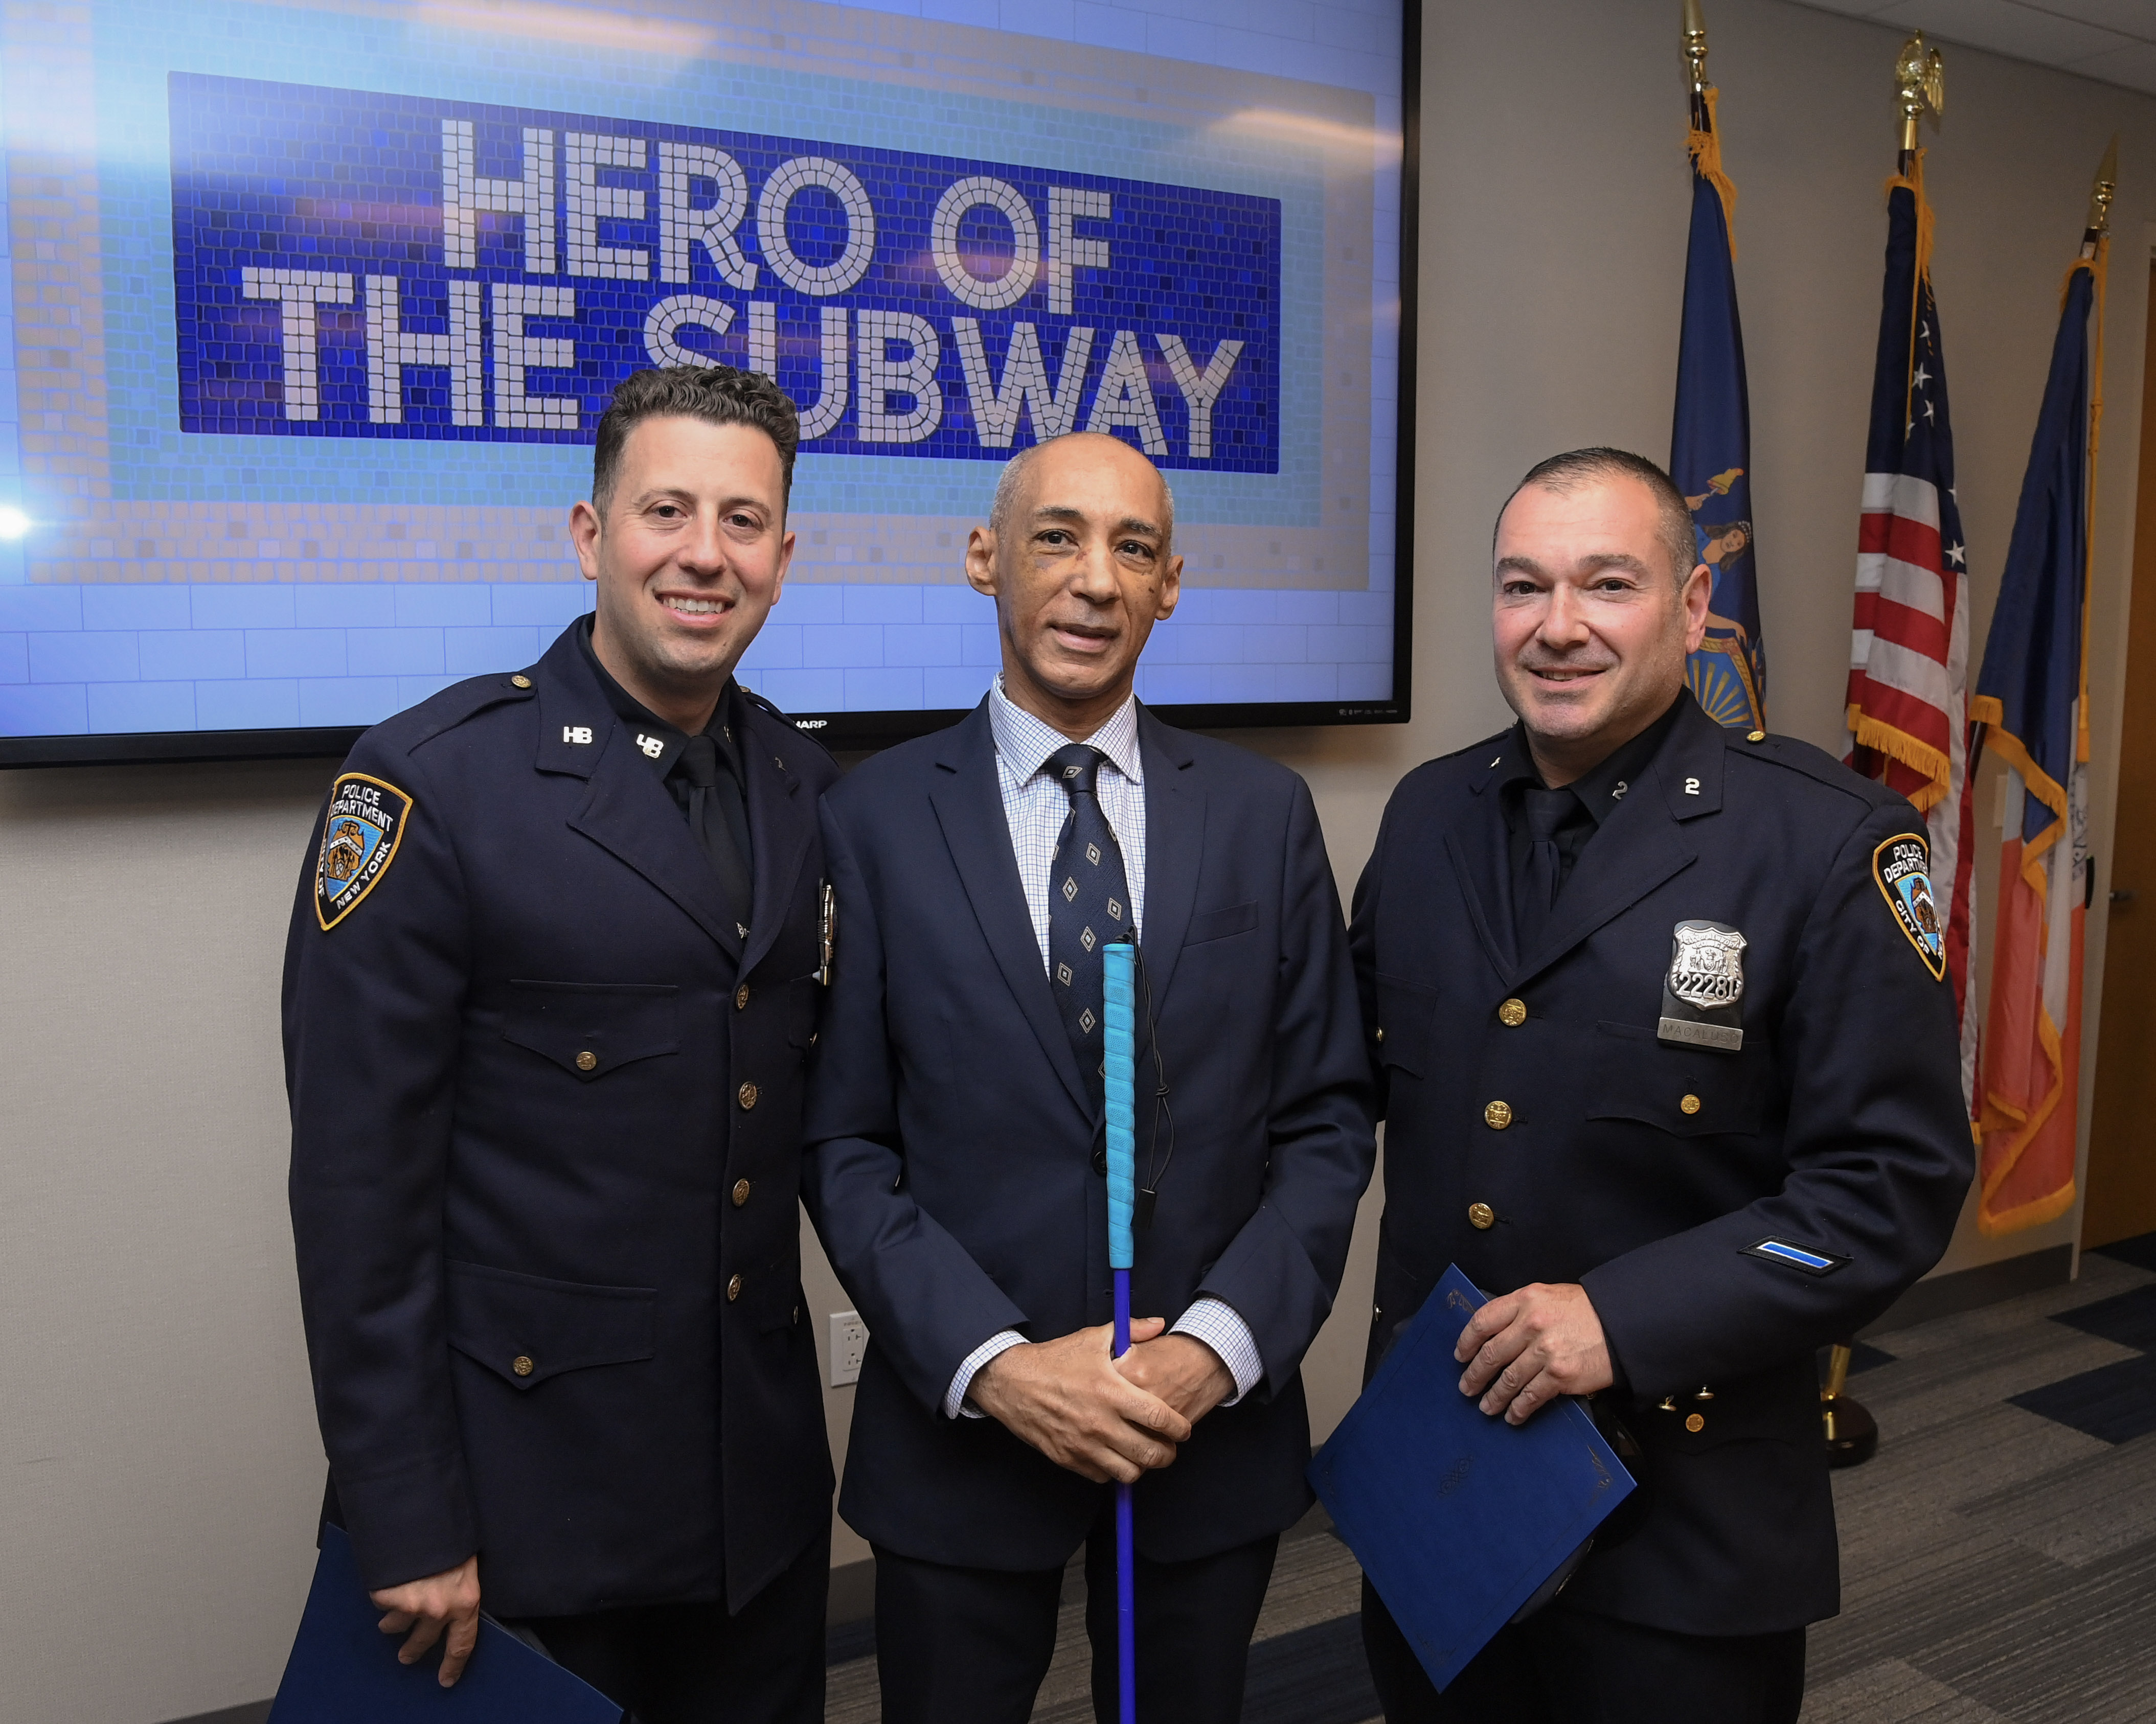 PHOTOS: MTA Honors Two Police Officers Who Rescued a Man from the Tracks in Brooklyn